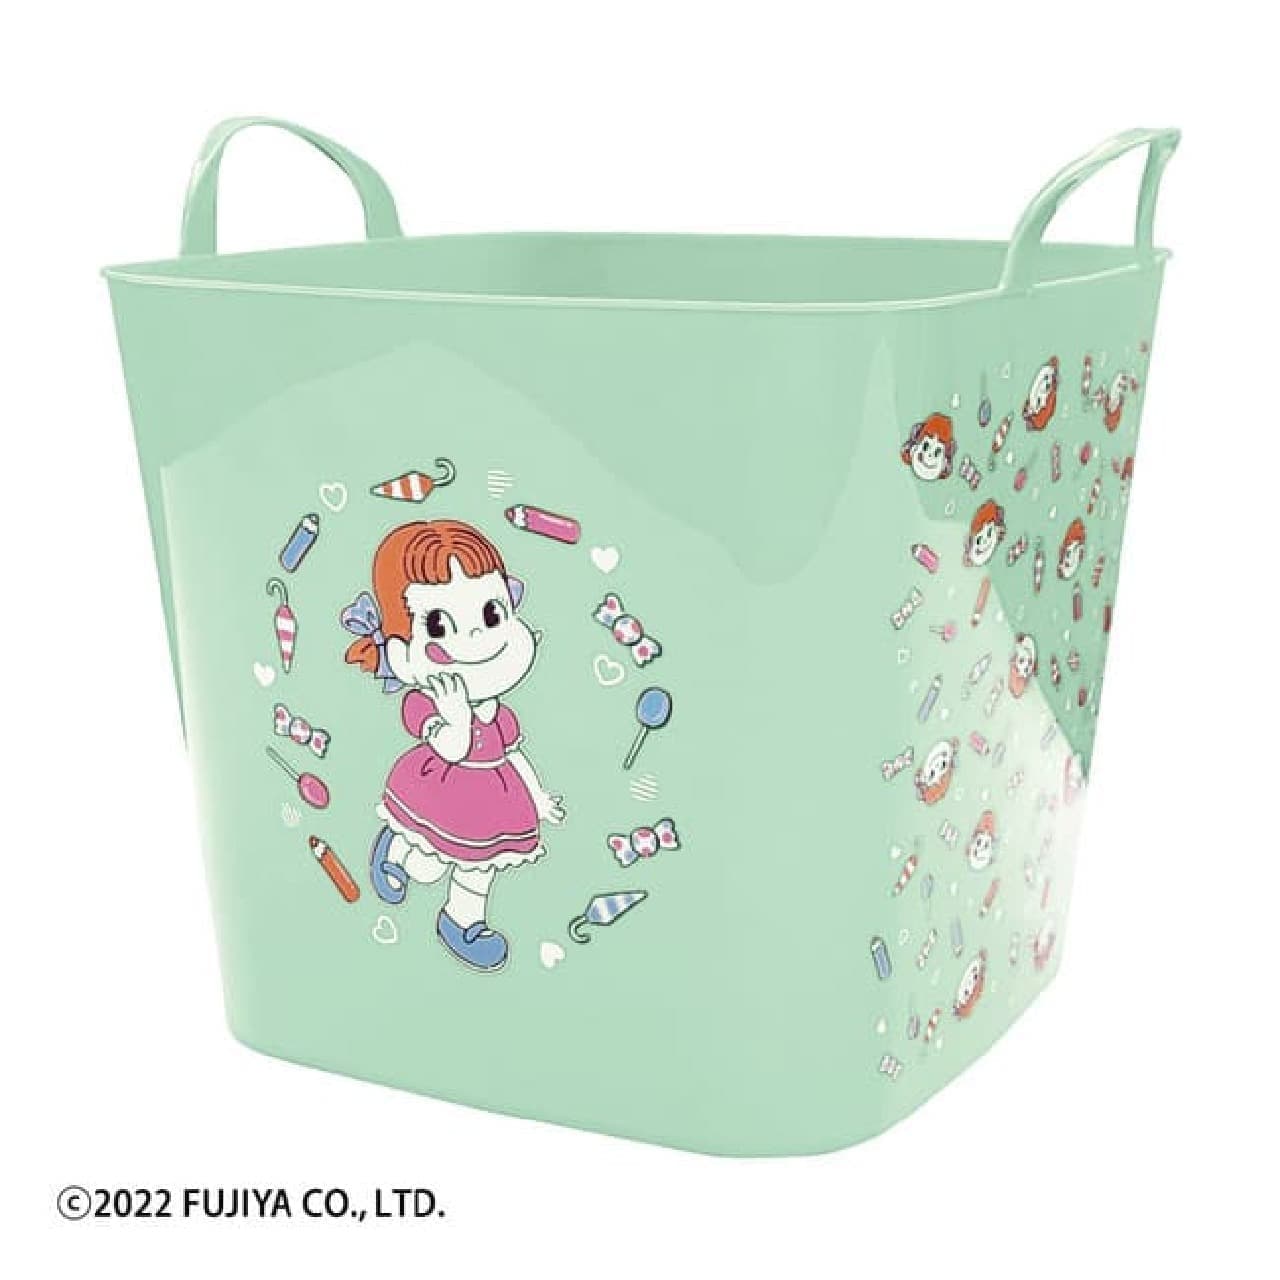 Peko-chan Multi-Basket and More at Maury Fantasy -- Valentine's Day Theme! Capsule toys too!